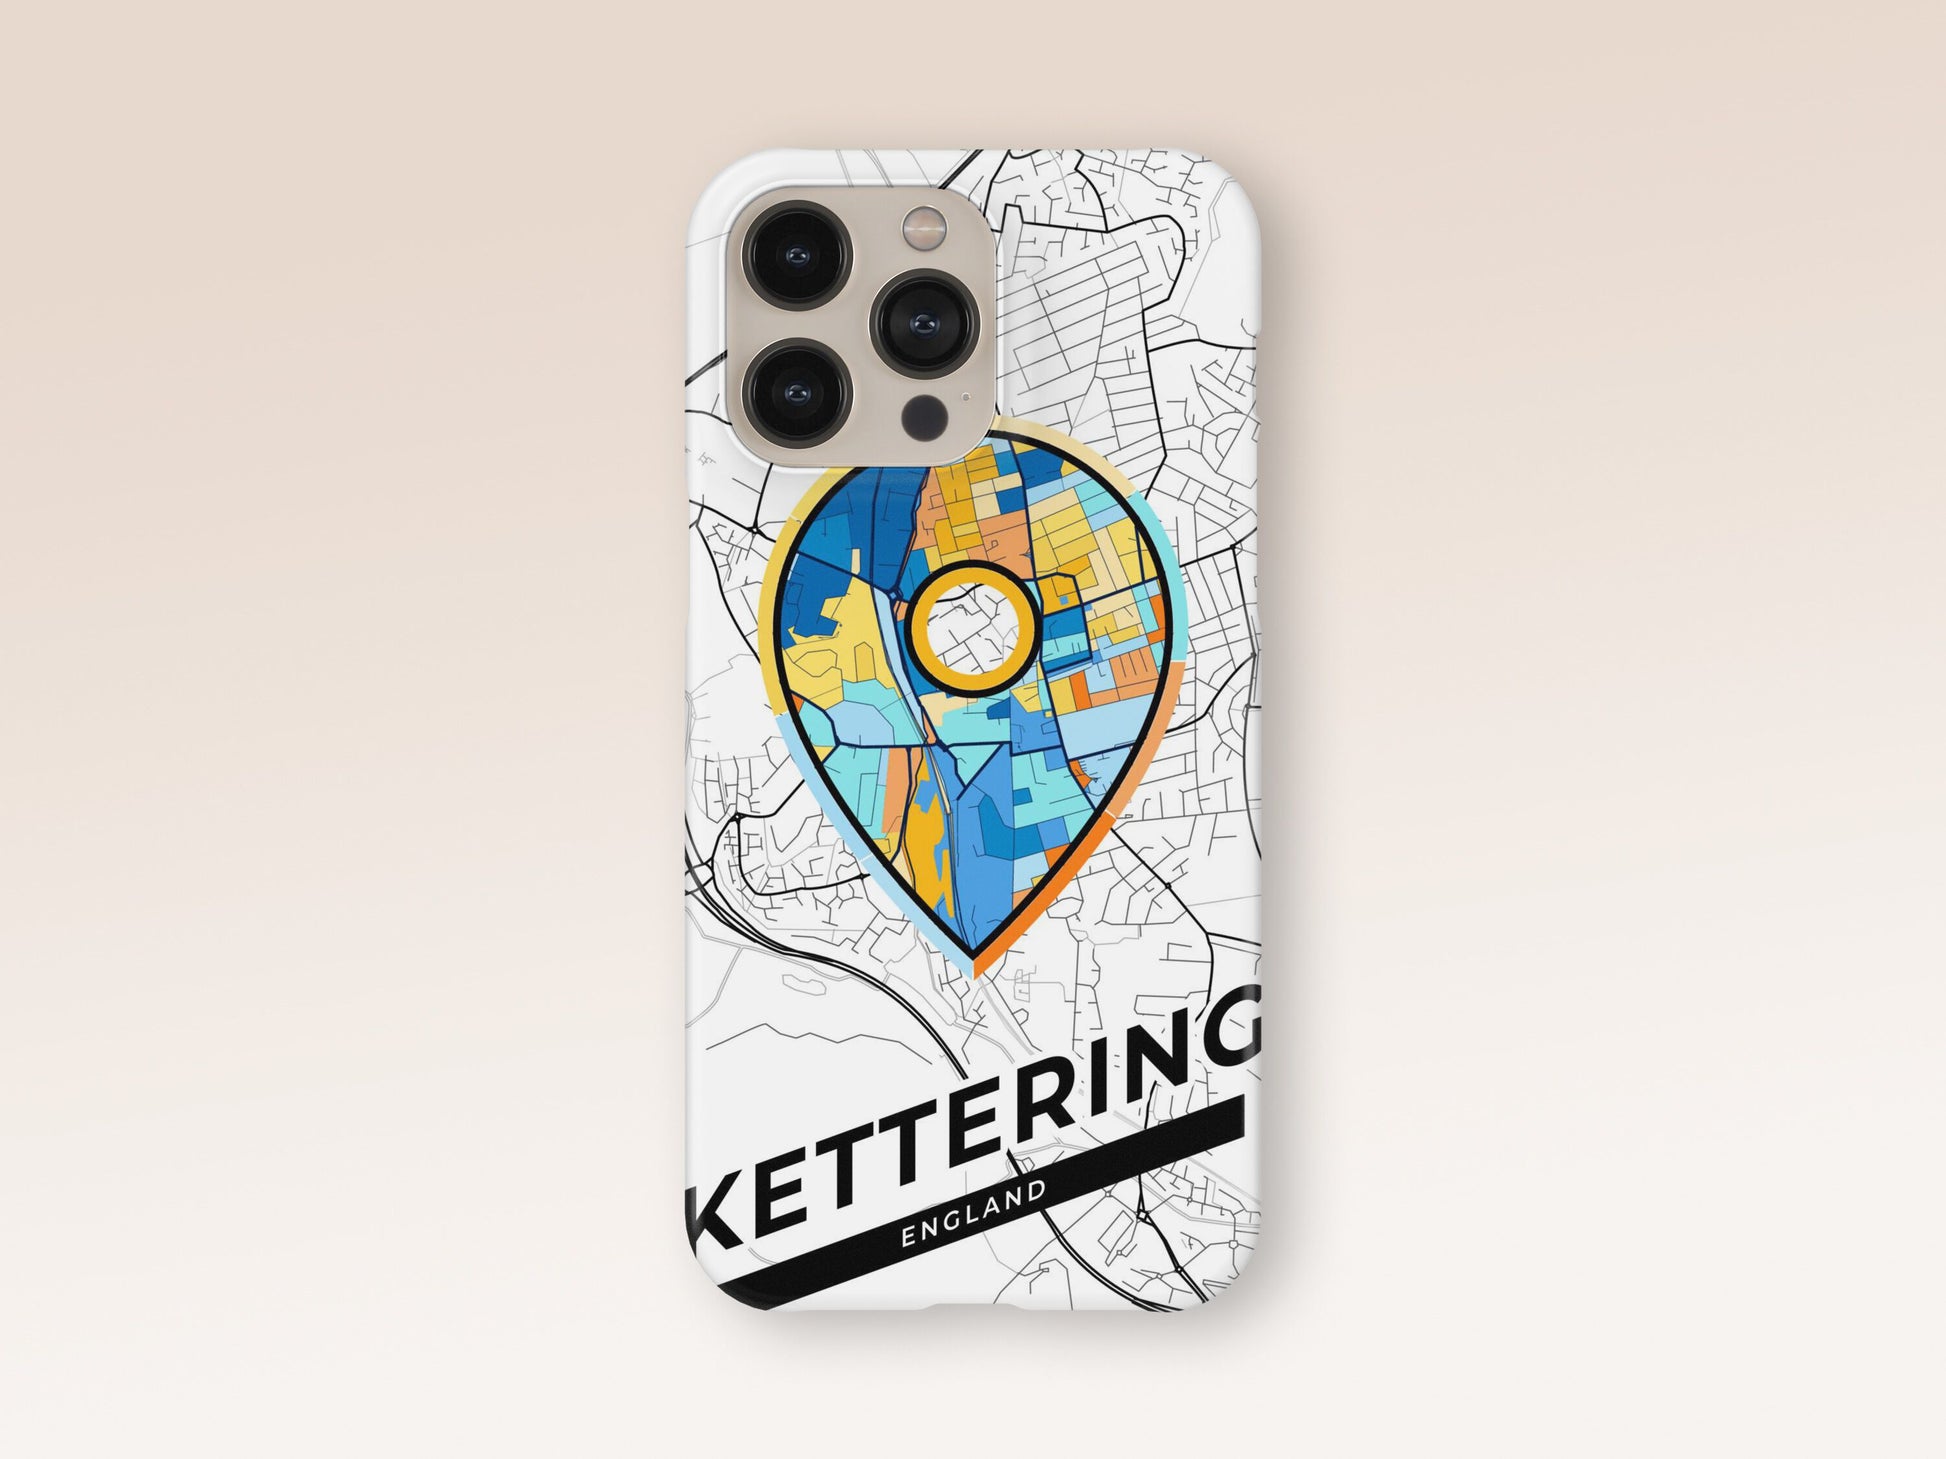 Kettering England slim phone case with colorful icon. Birthday, wedding or housewarming gift. Couple match cases. 1